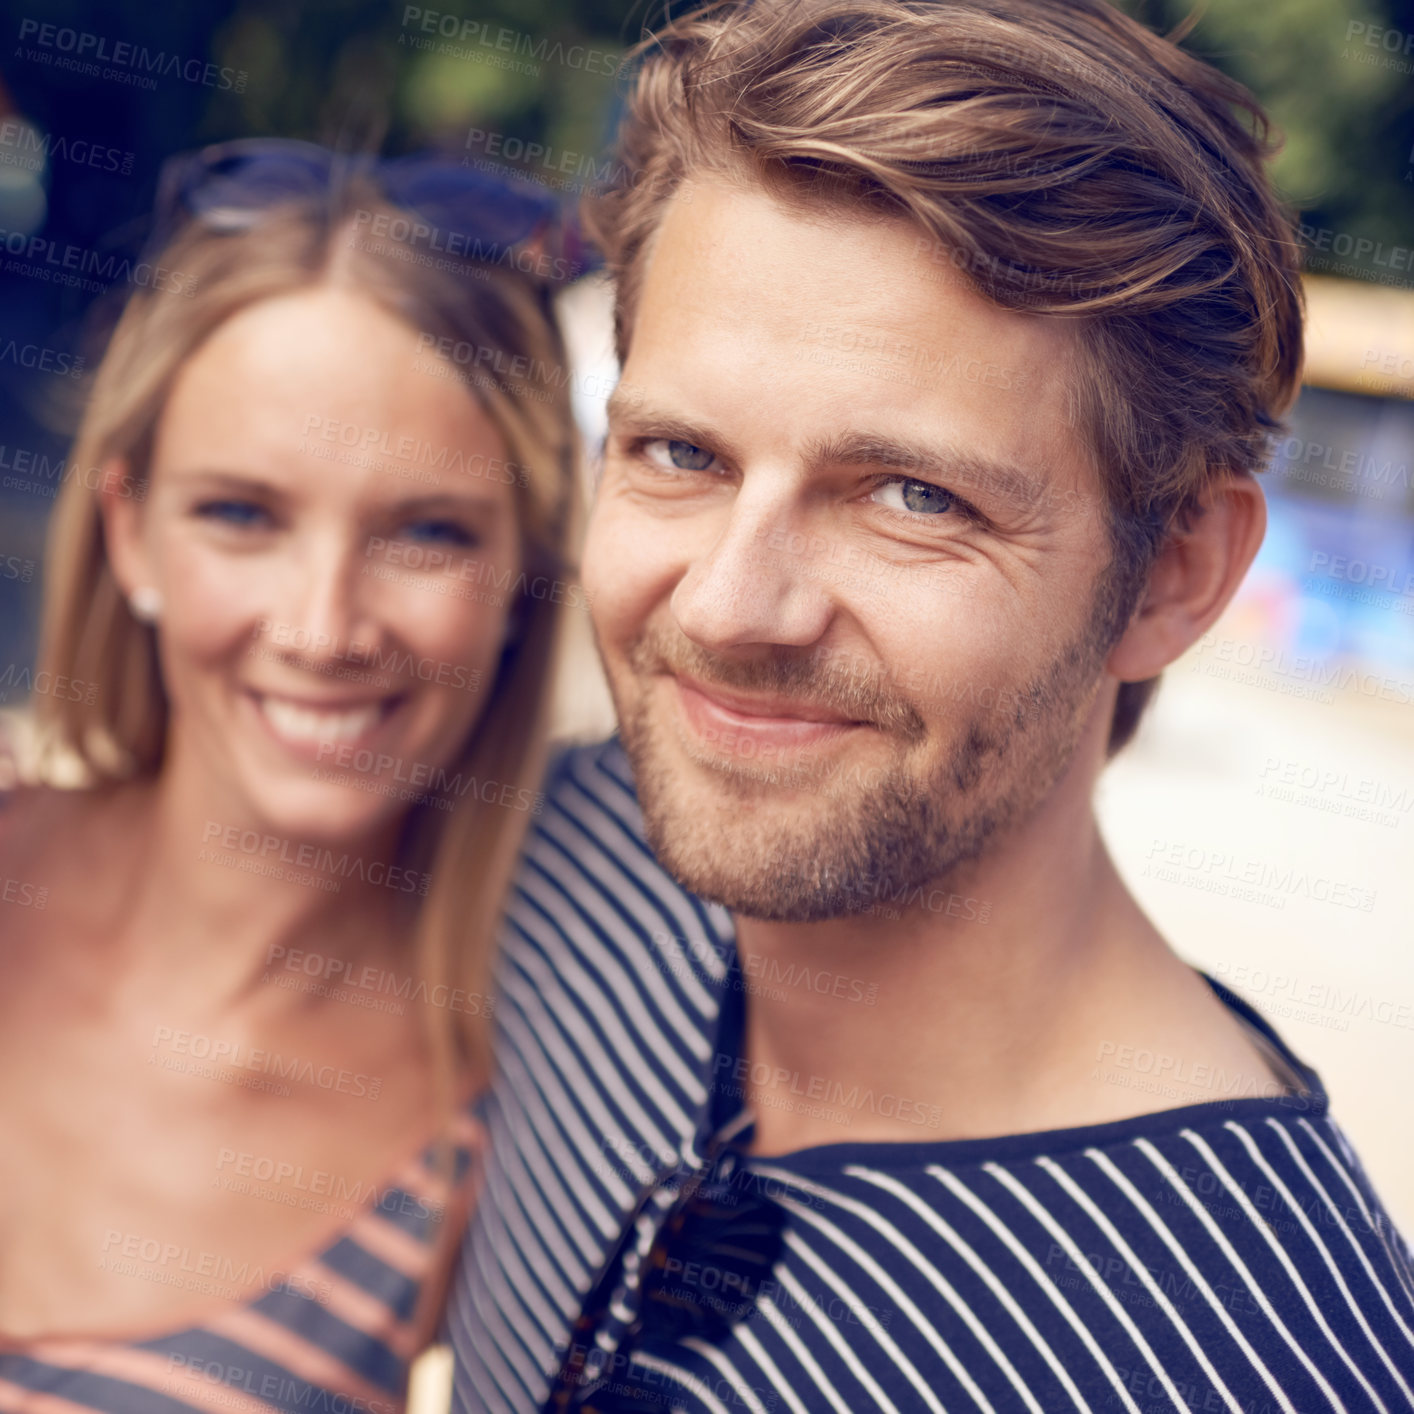 Buy stock photo Portrait of an attractive couple standing together and smiling